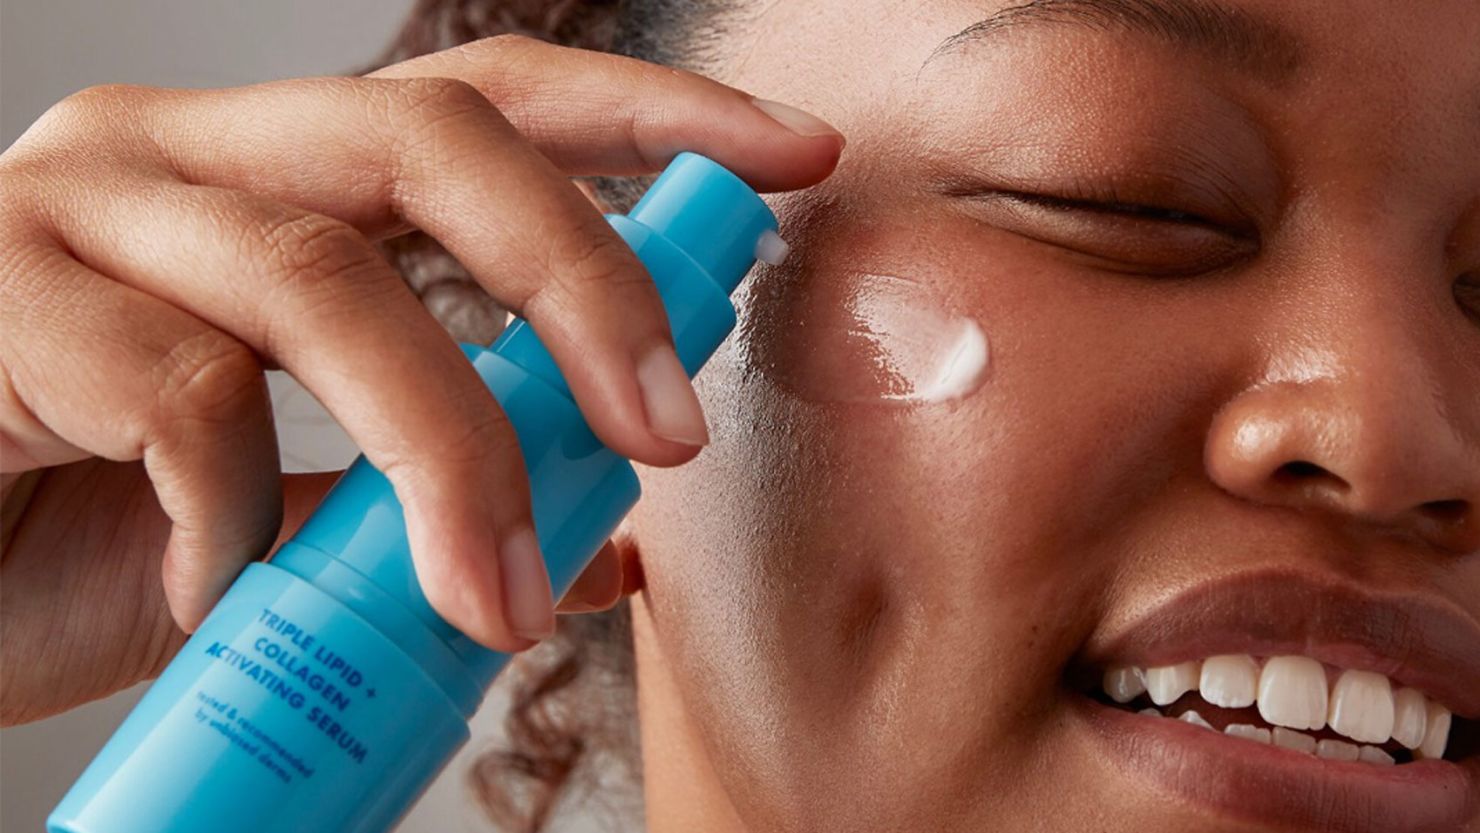 Should You Add Bio-Oil to Your Skincare Routine? Derms Explain